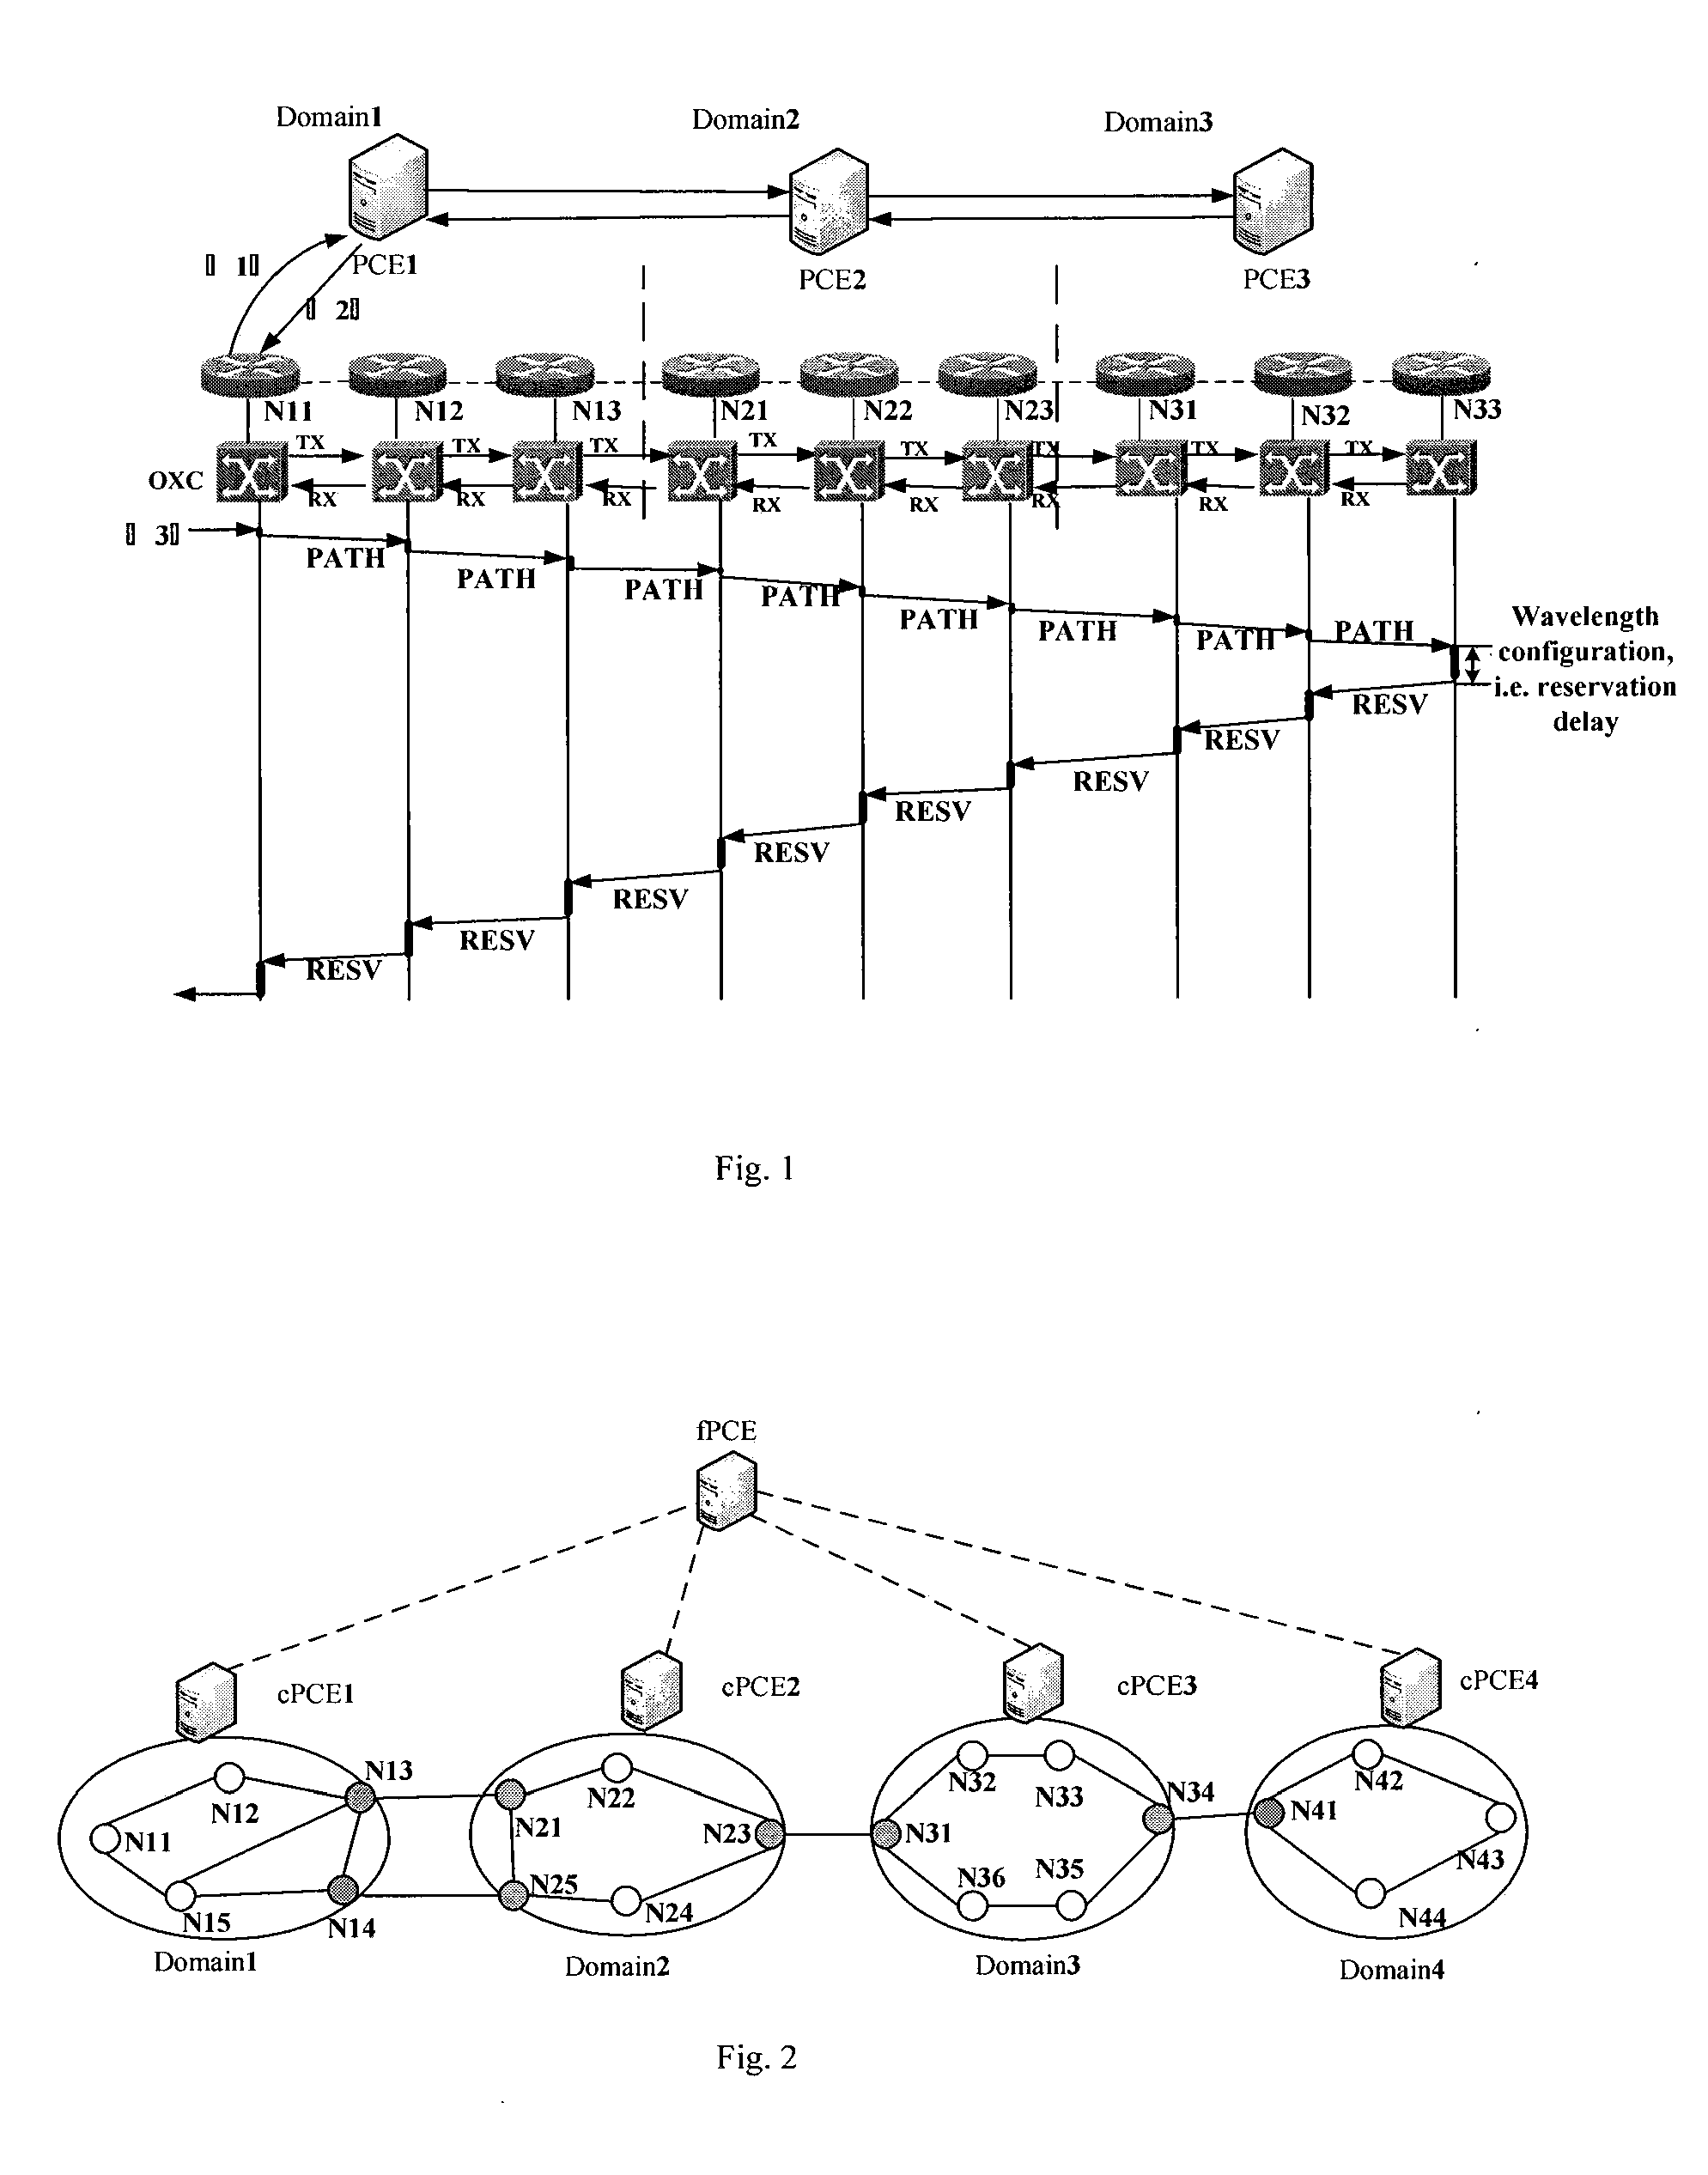 Method for Establishing an Inter-Domain Path that Satisfies Wavelength Continuity Constraint